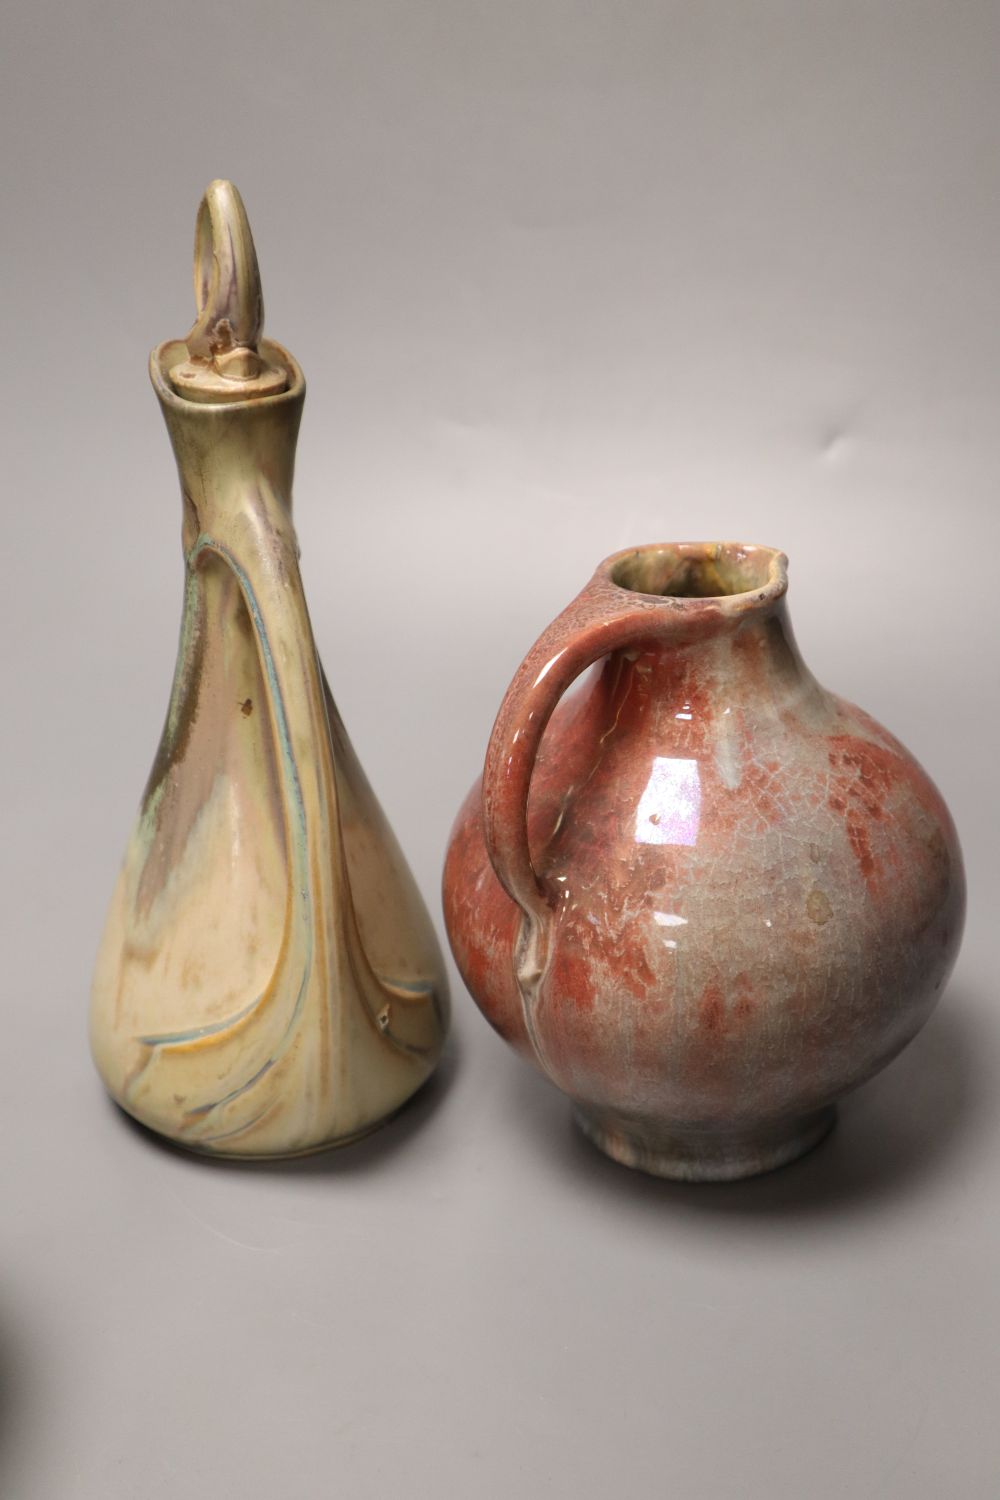 Three items of Art Pottery, including a stoneware ewer and stopper, drip-glazed in shades of blue - Image 3 of 5